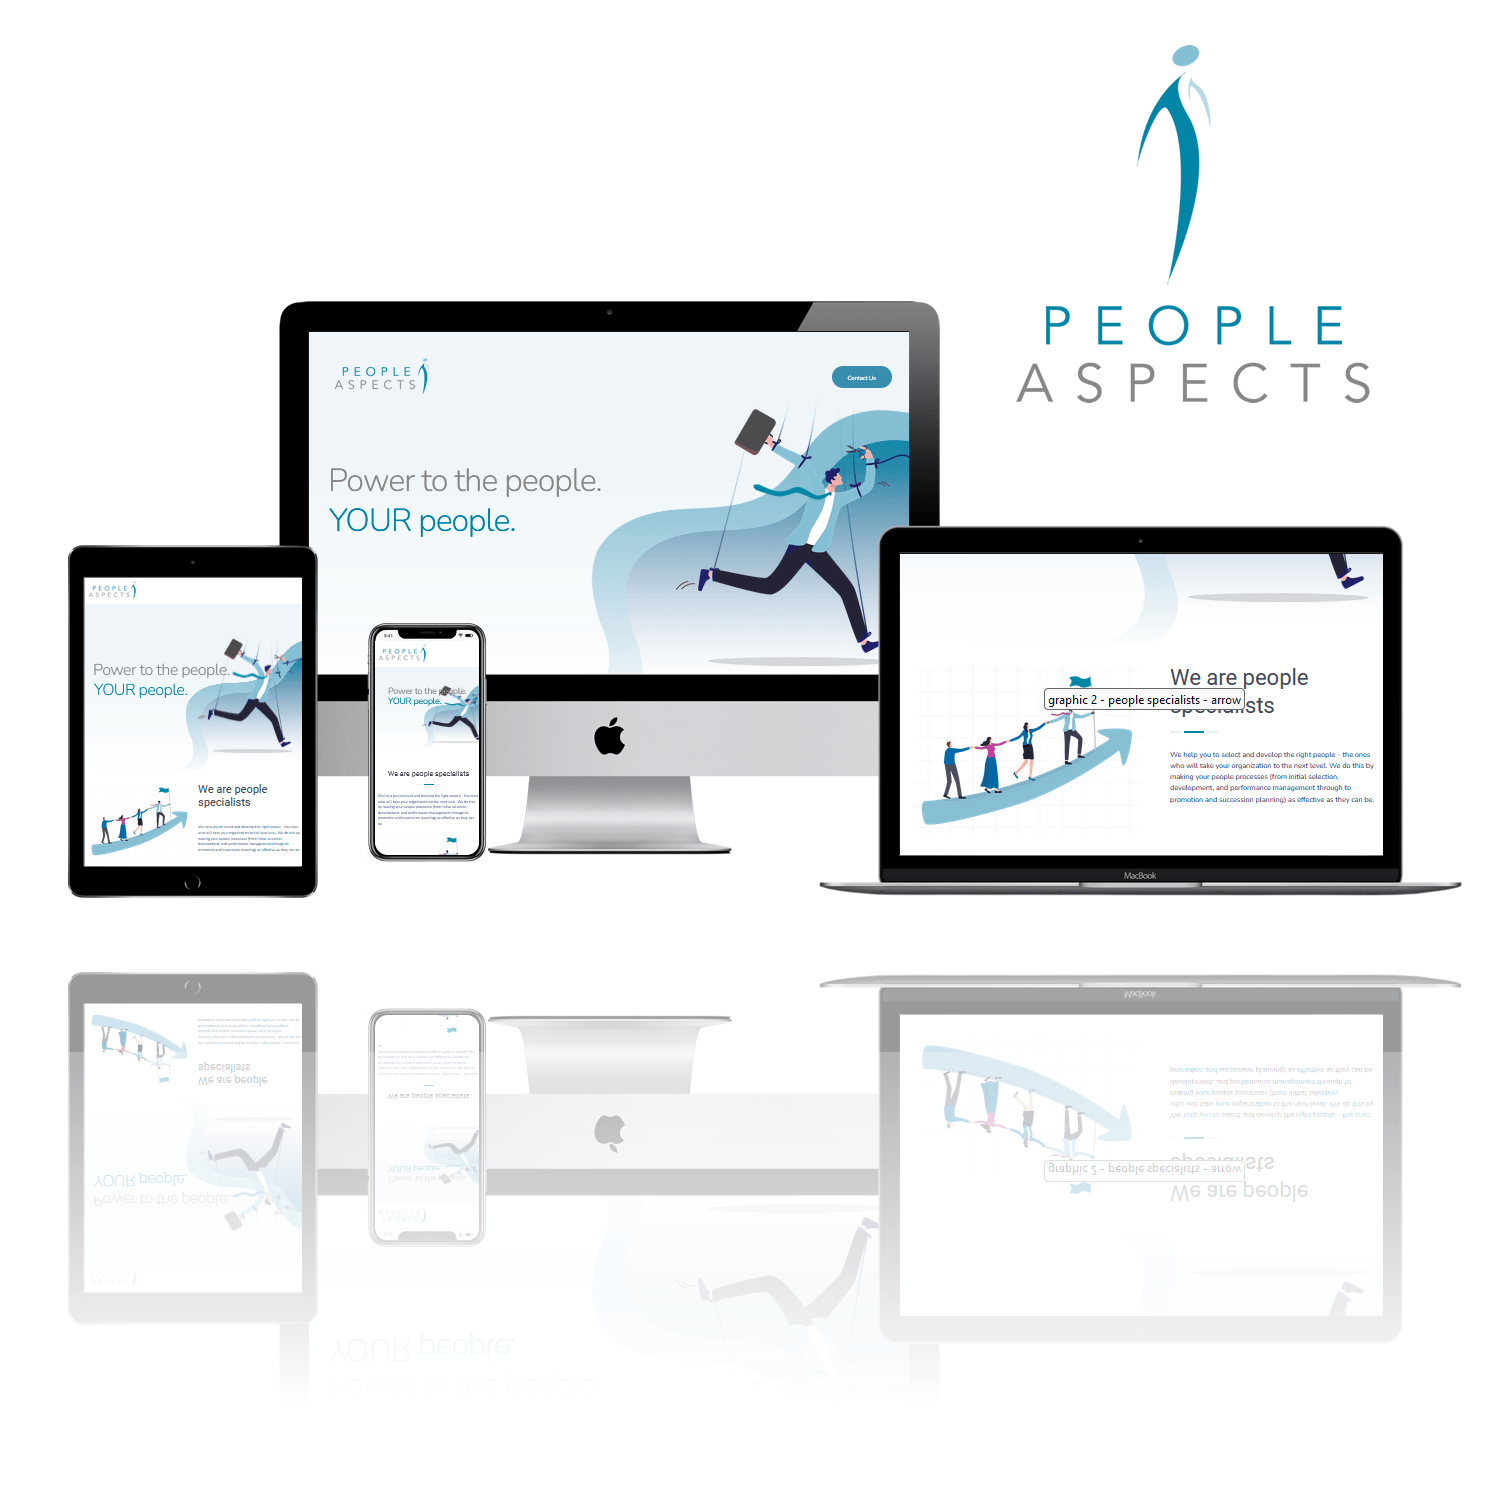 Website for people aspects business consultants and HR specialists in North Yorkshire